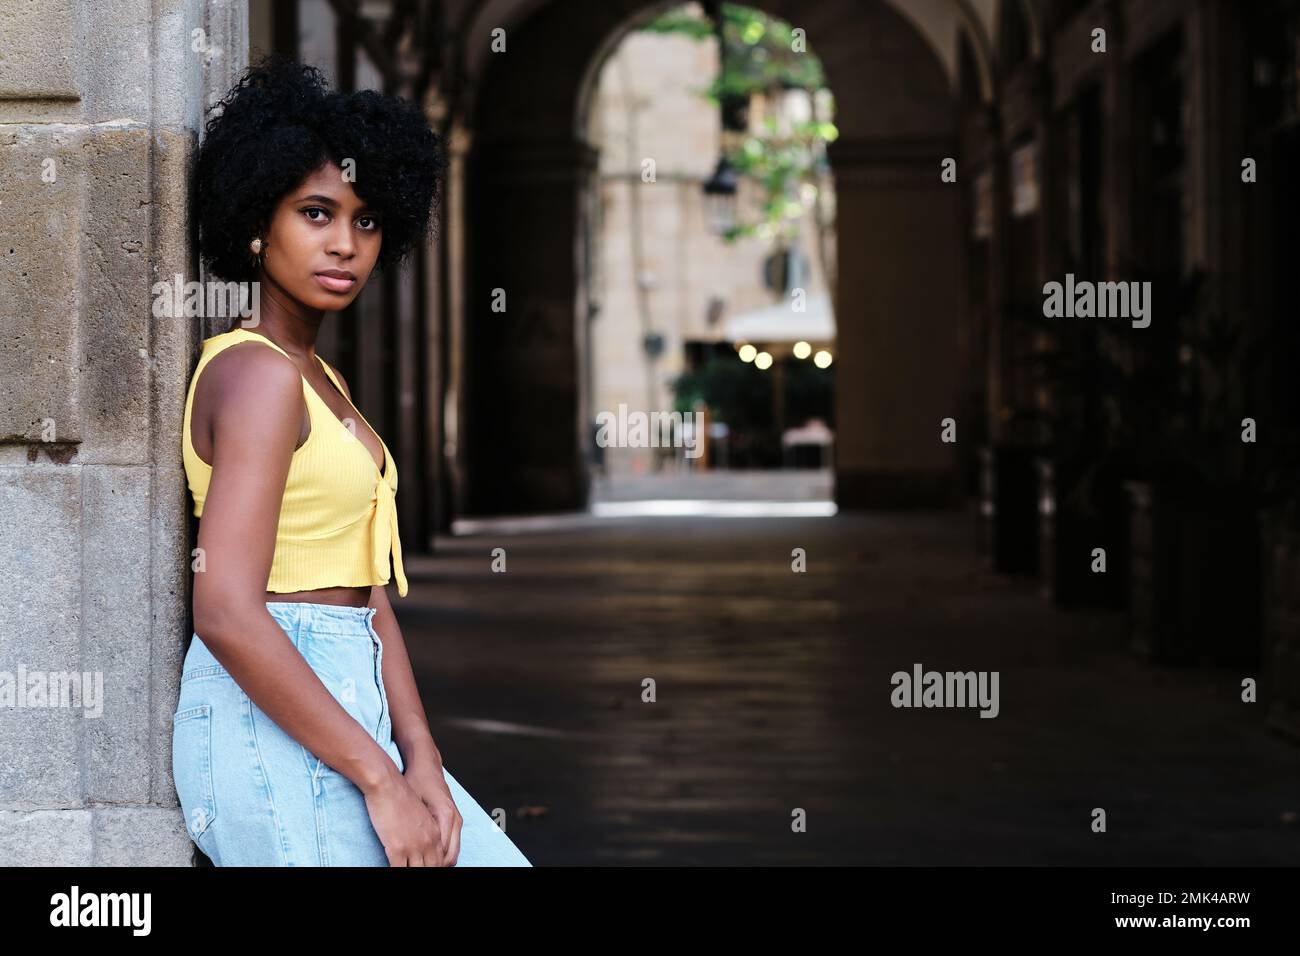 Woman with afro hair looking at camera while posing outdoors. Stock Photo